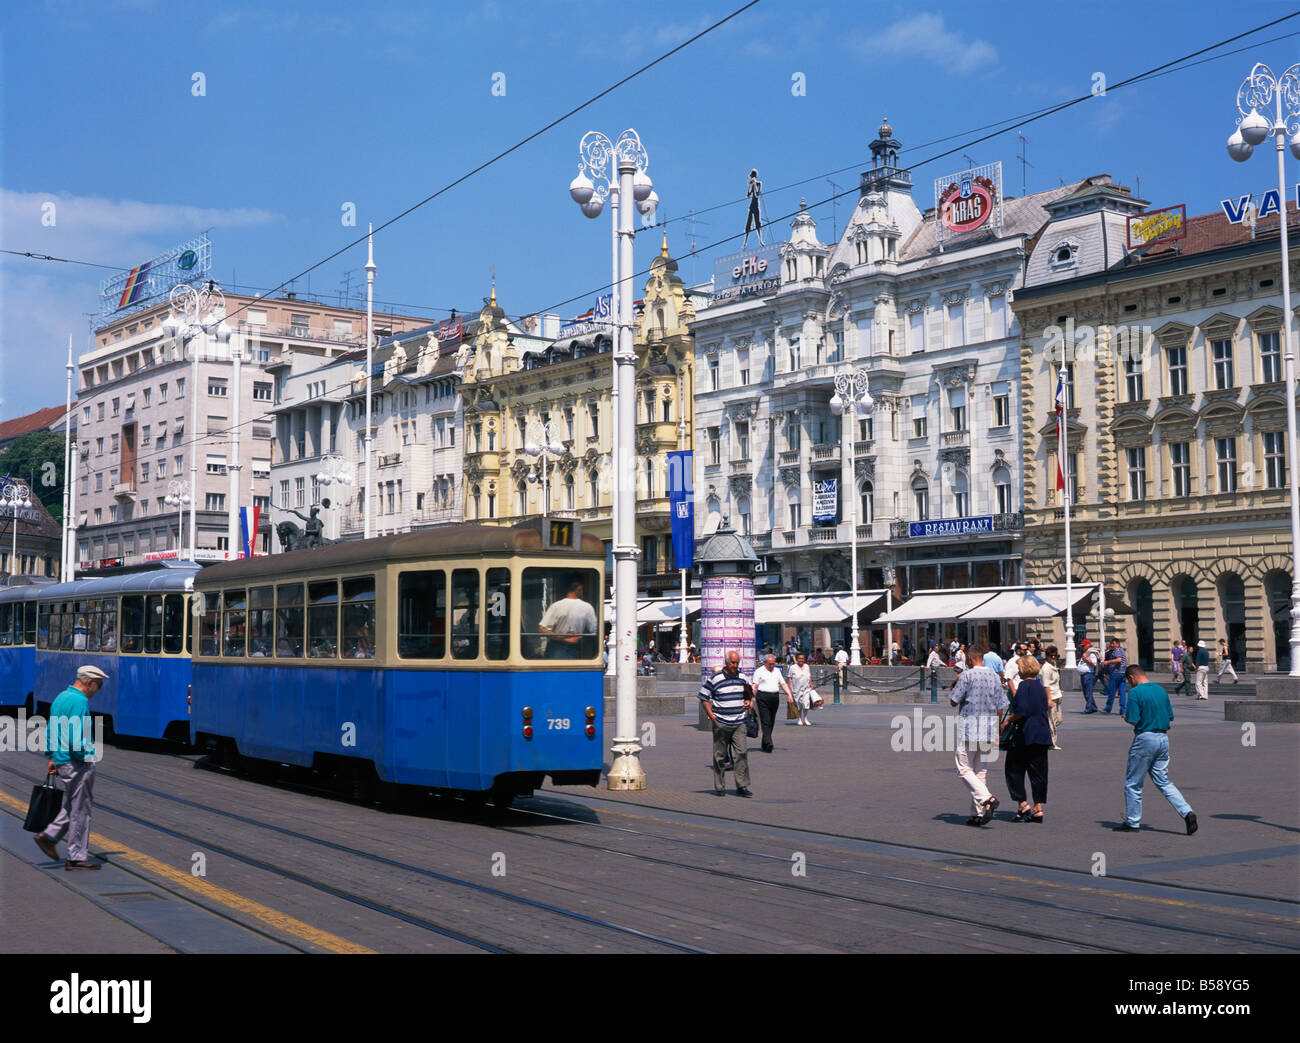 Street scene with tram in the city centre of Zagreb Croatia C Bowman